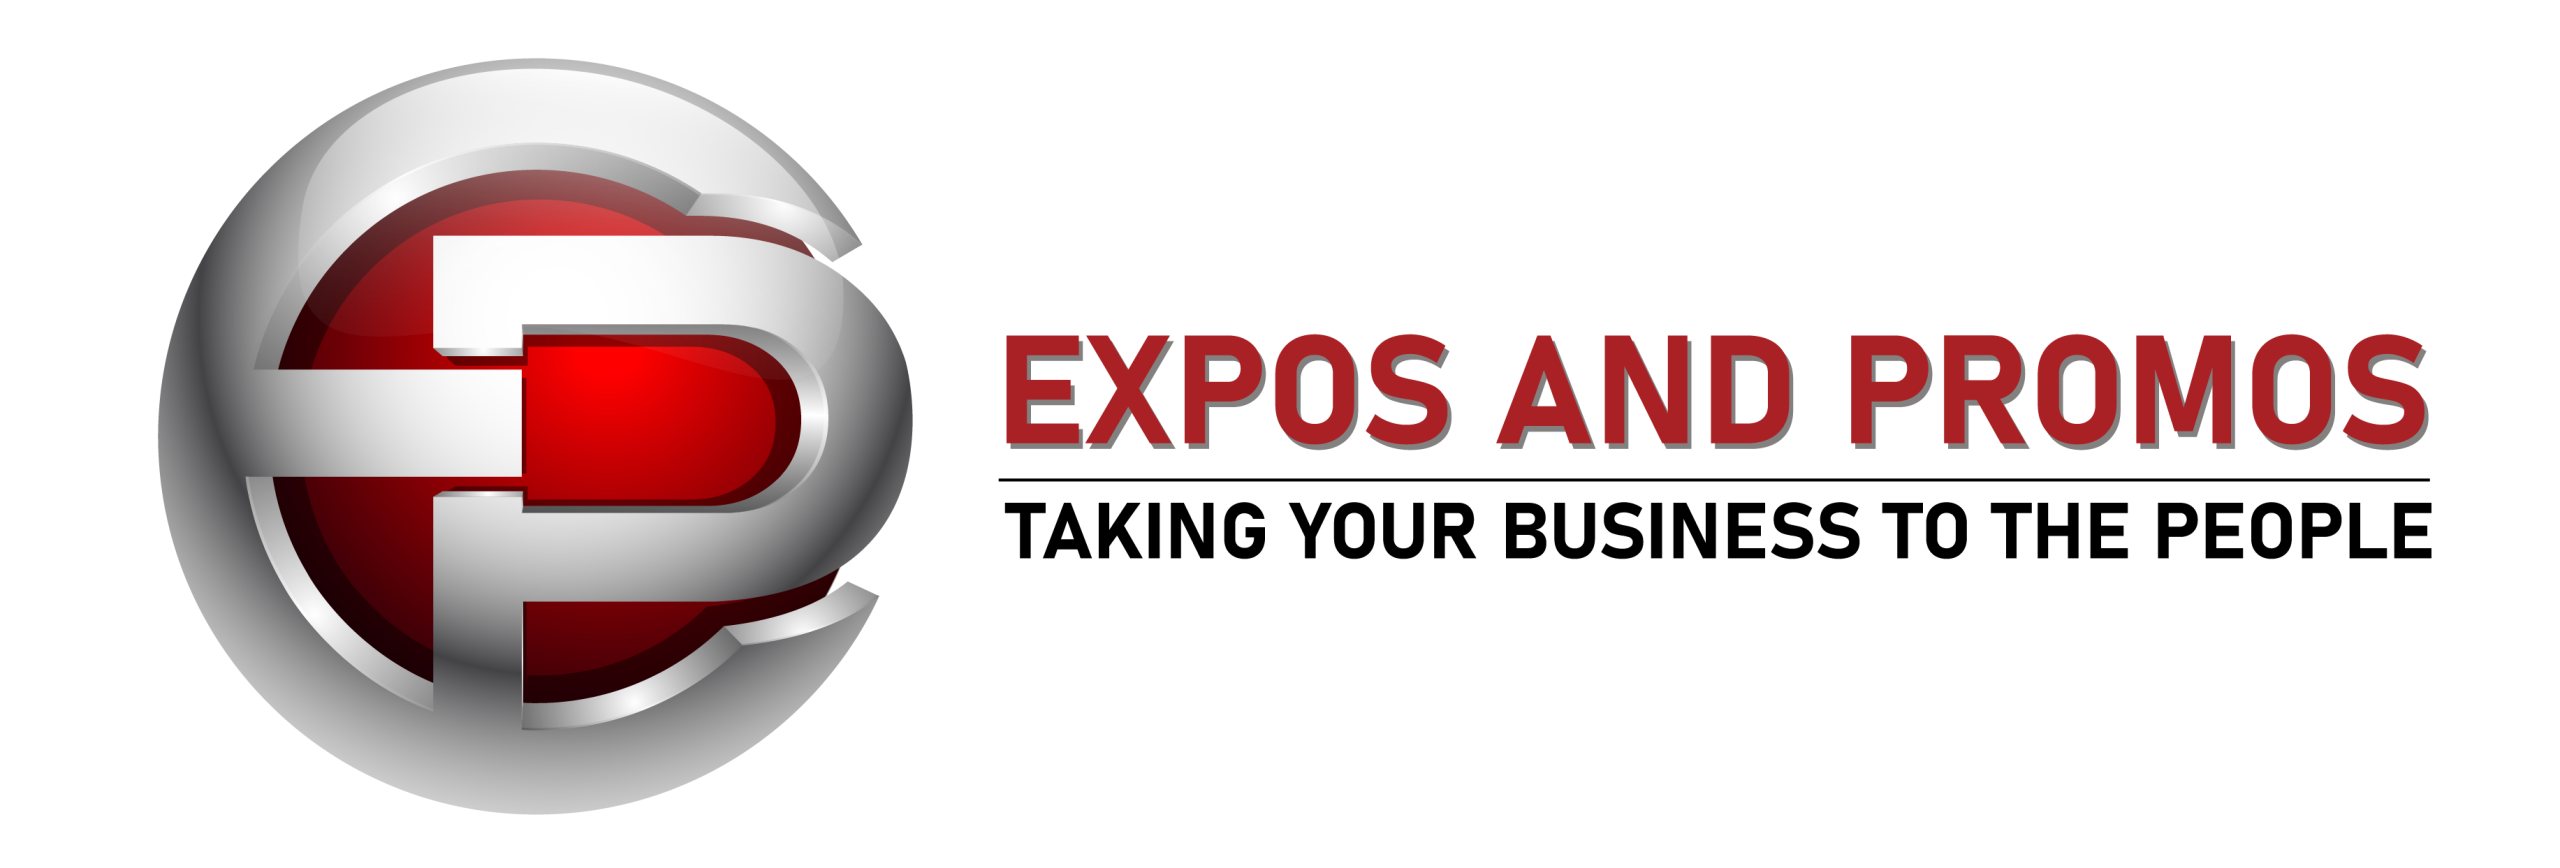 EXPOS AND PROMOS